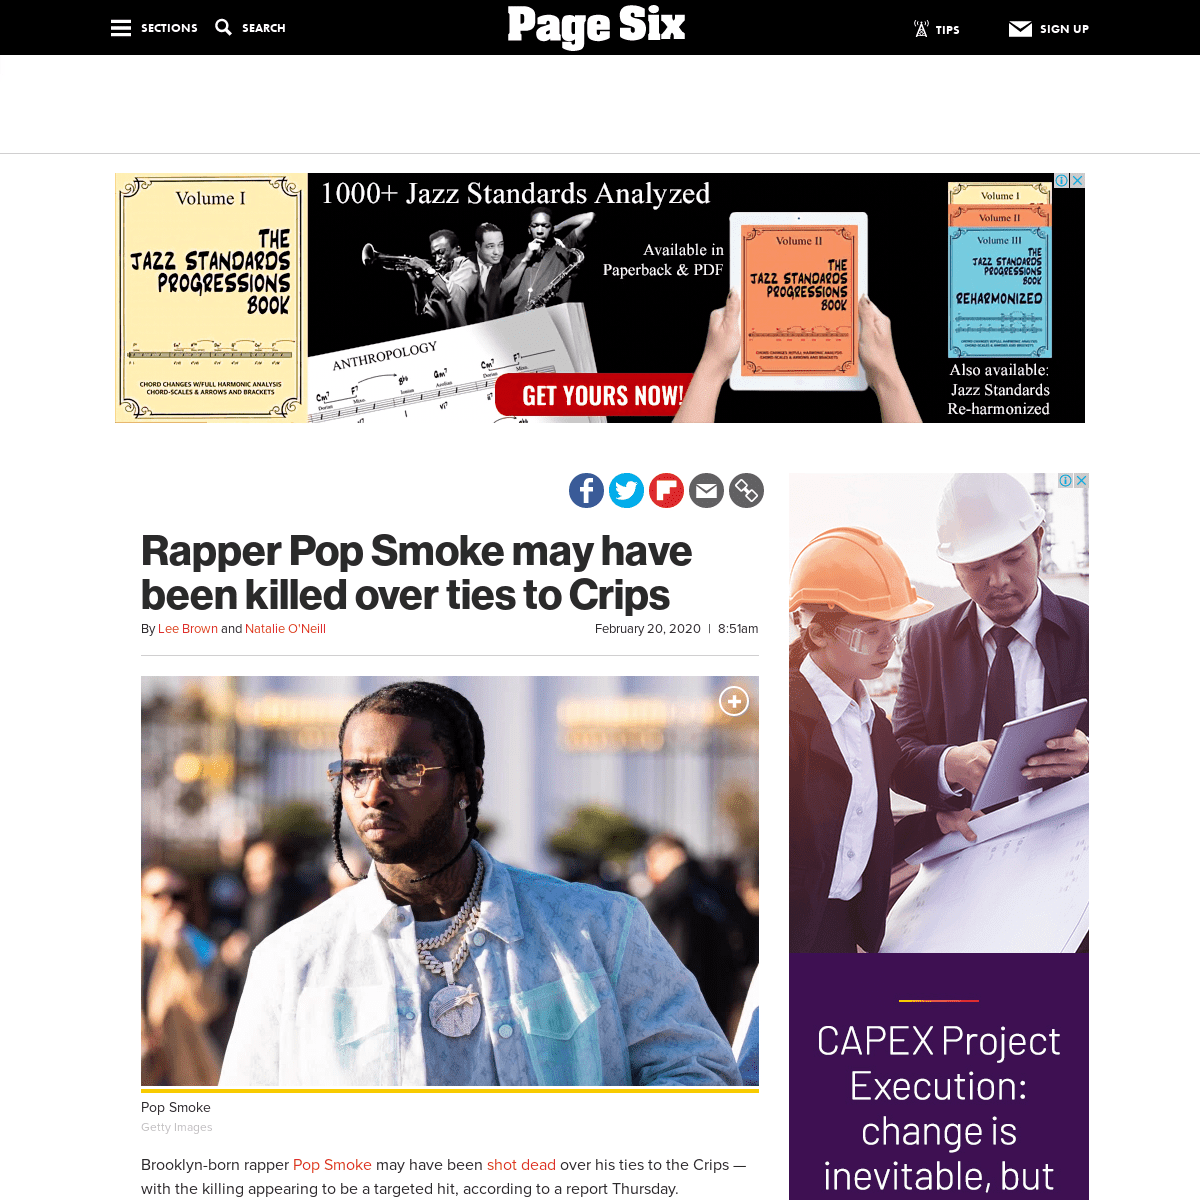 A complete backup of pagesix.com/2020/02/20/rapper-pop-smoke-reportedly-may-have-been-killed-over-ties-to-crips/